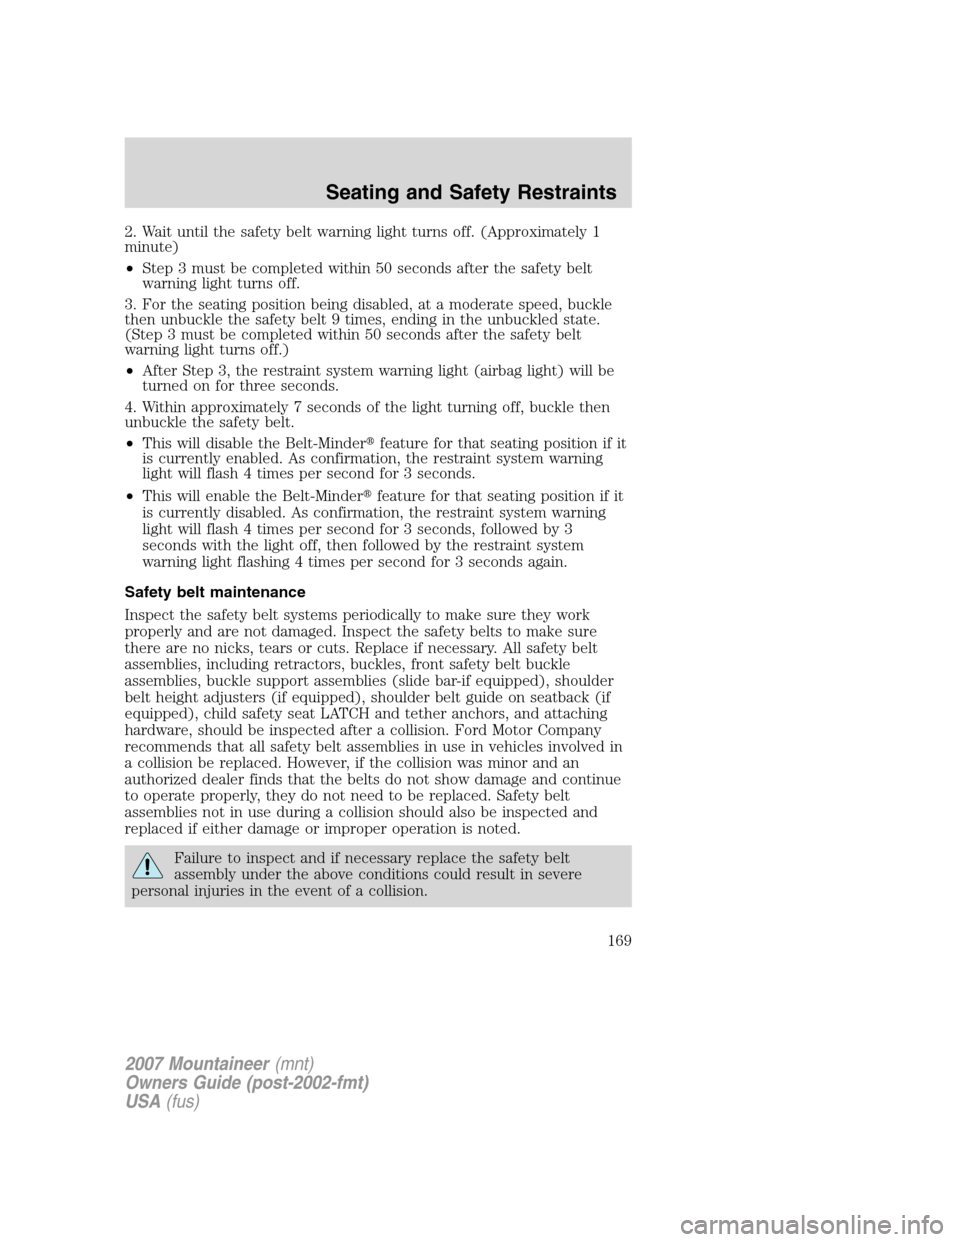 Mercury Mountaineer 2007  Owners Manuals 2. Wait until the safety belt warning light turns off. (Approximately 1
minute)
•Step 3 must be completed within 50 seconds after the safety belt
warning light turns off.
3. For the seating position